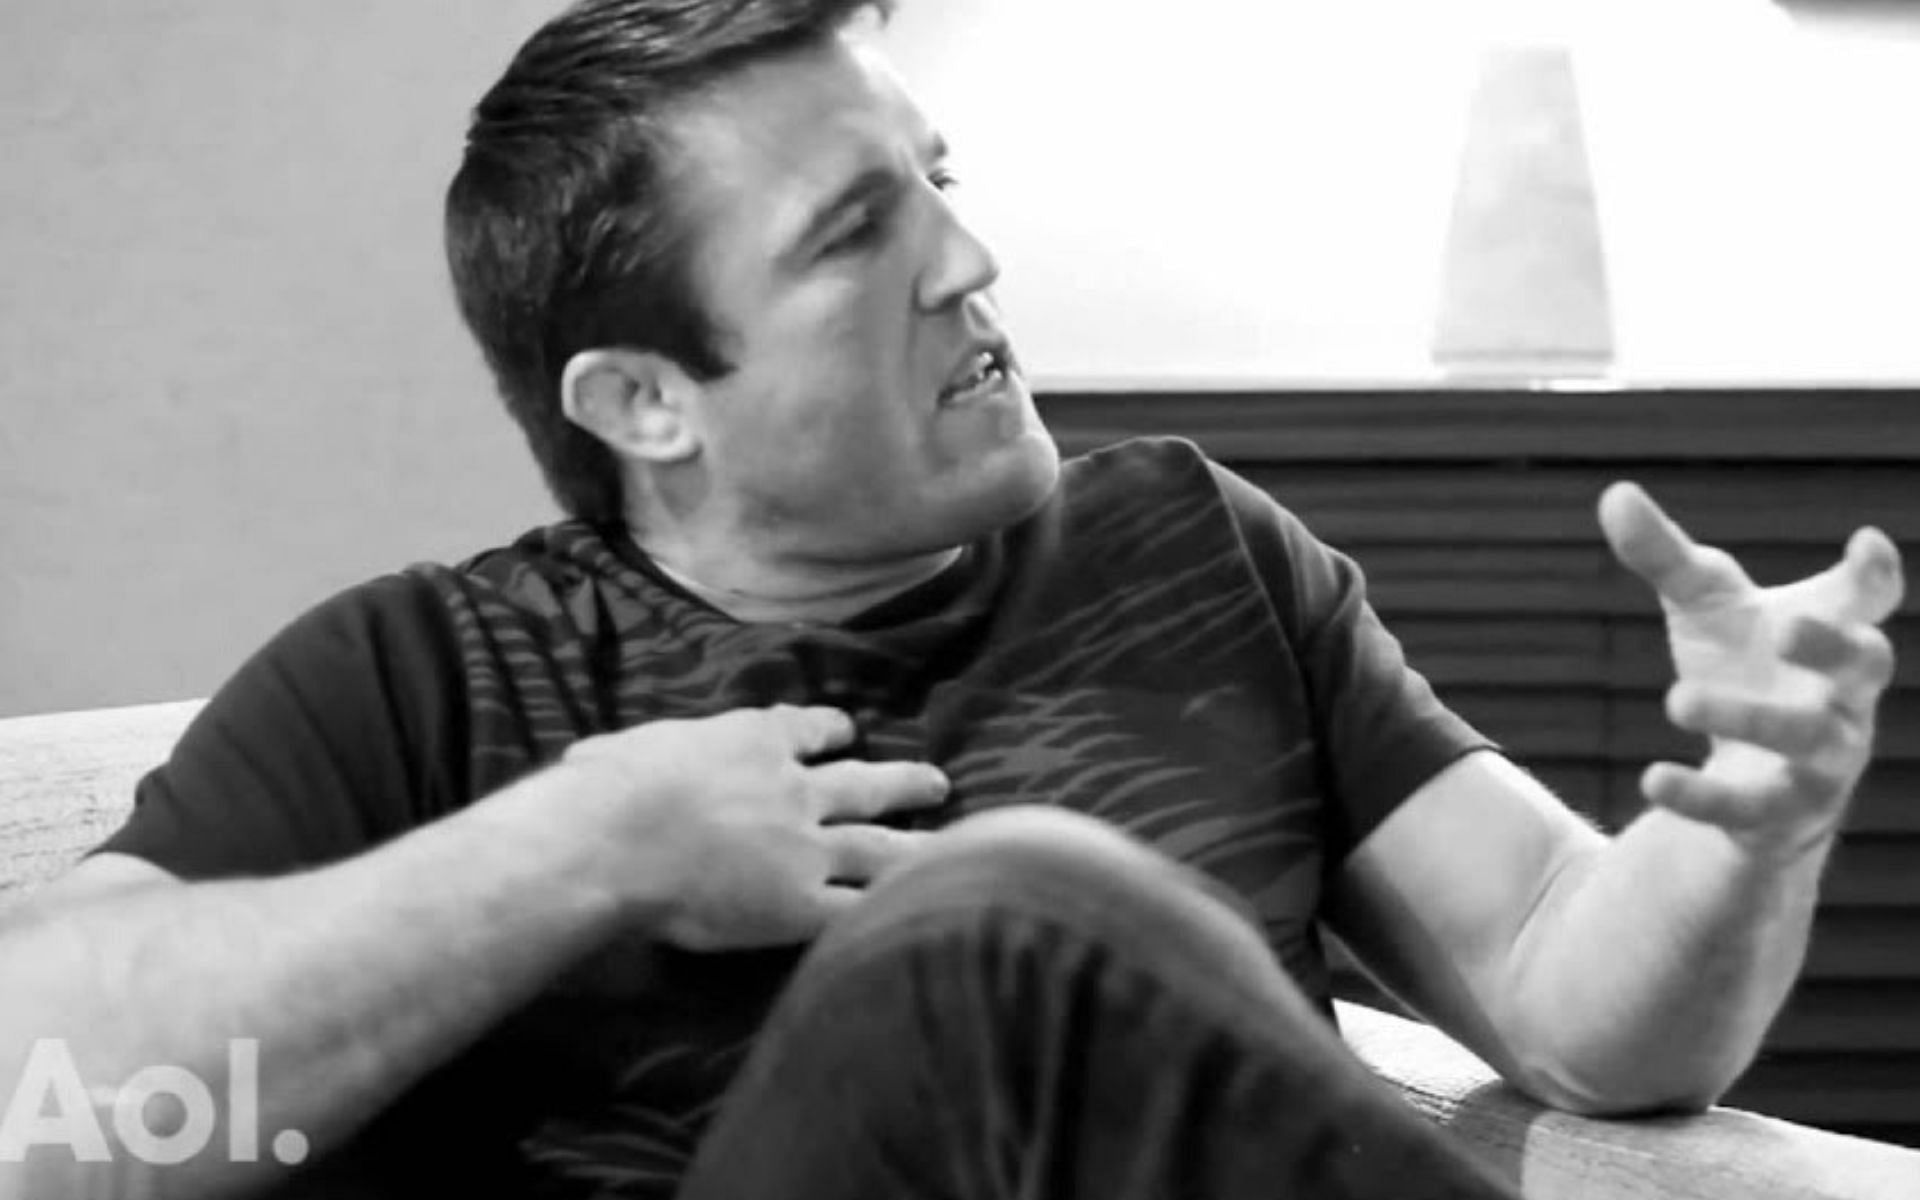 Chael Sonnen [image courtesy of @TroyFrappier/YouTube]